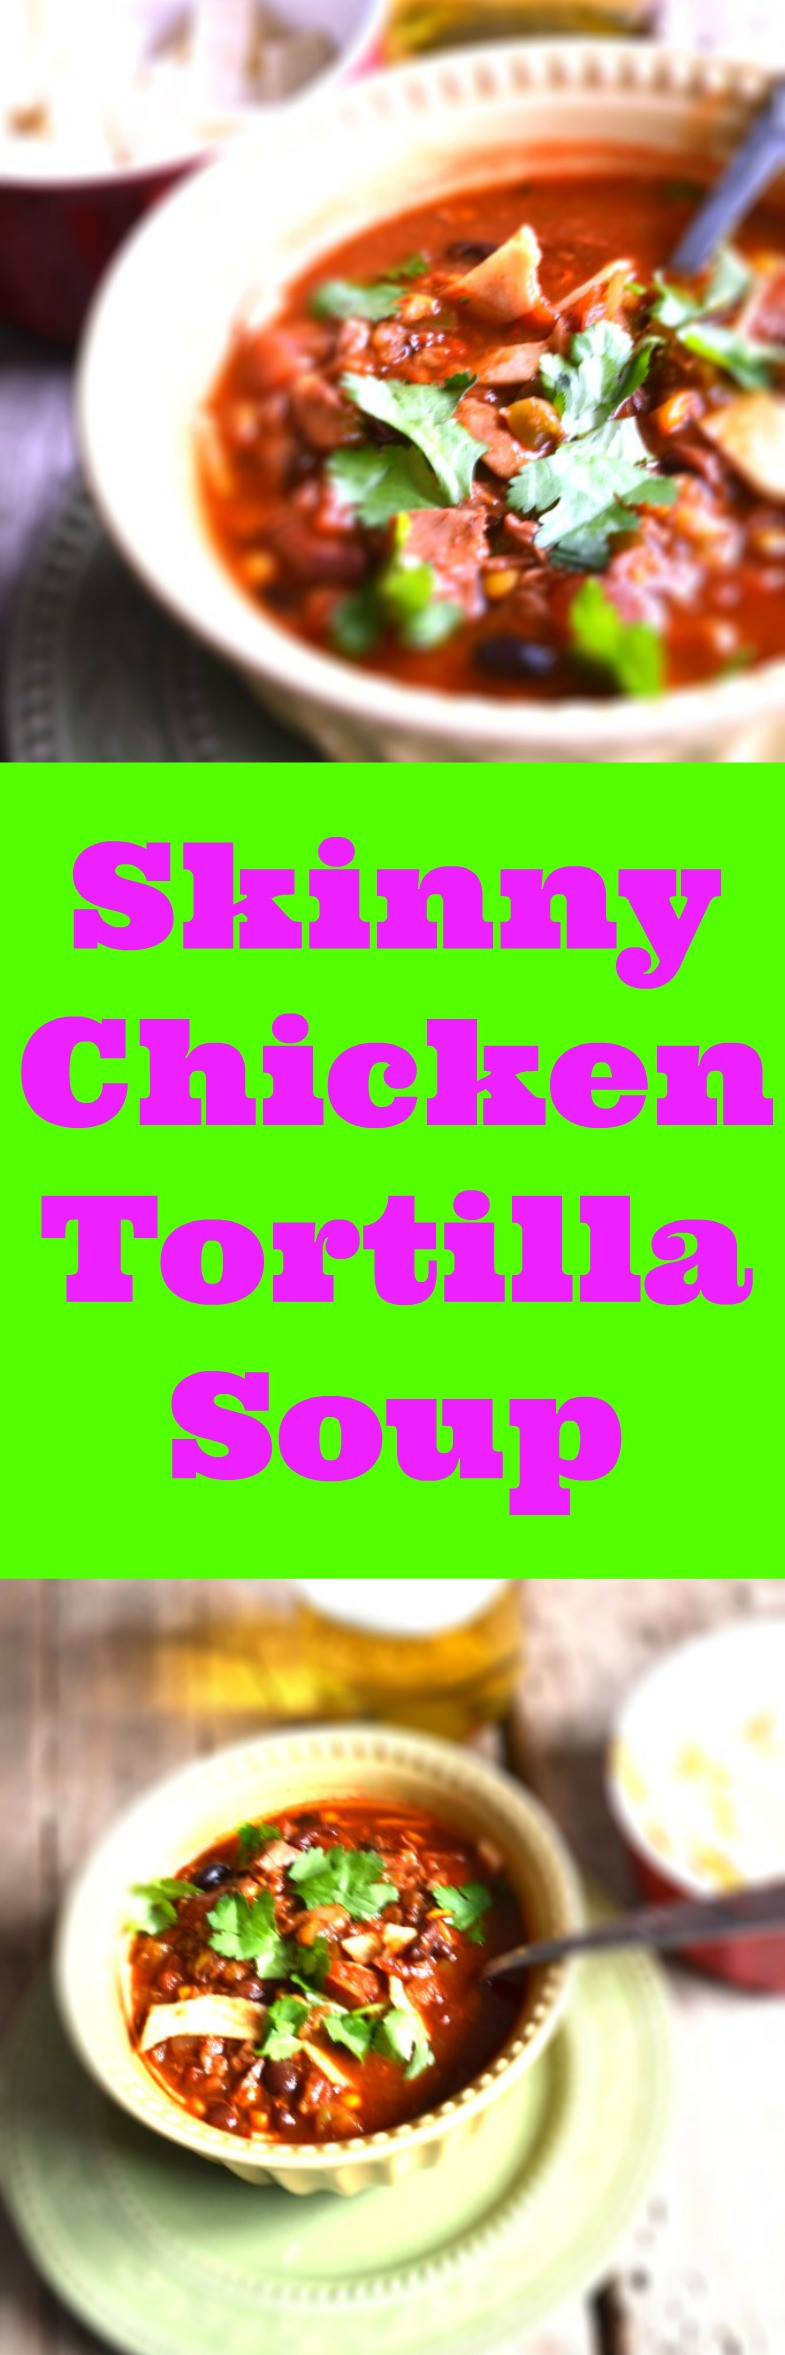 Low Fat Chicken Tortilla Soup
 Low Fat Chicken Tortilla Soup Recipe a Natural Remedy to